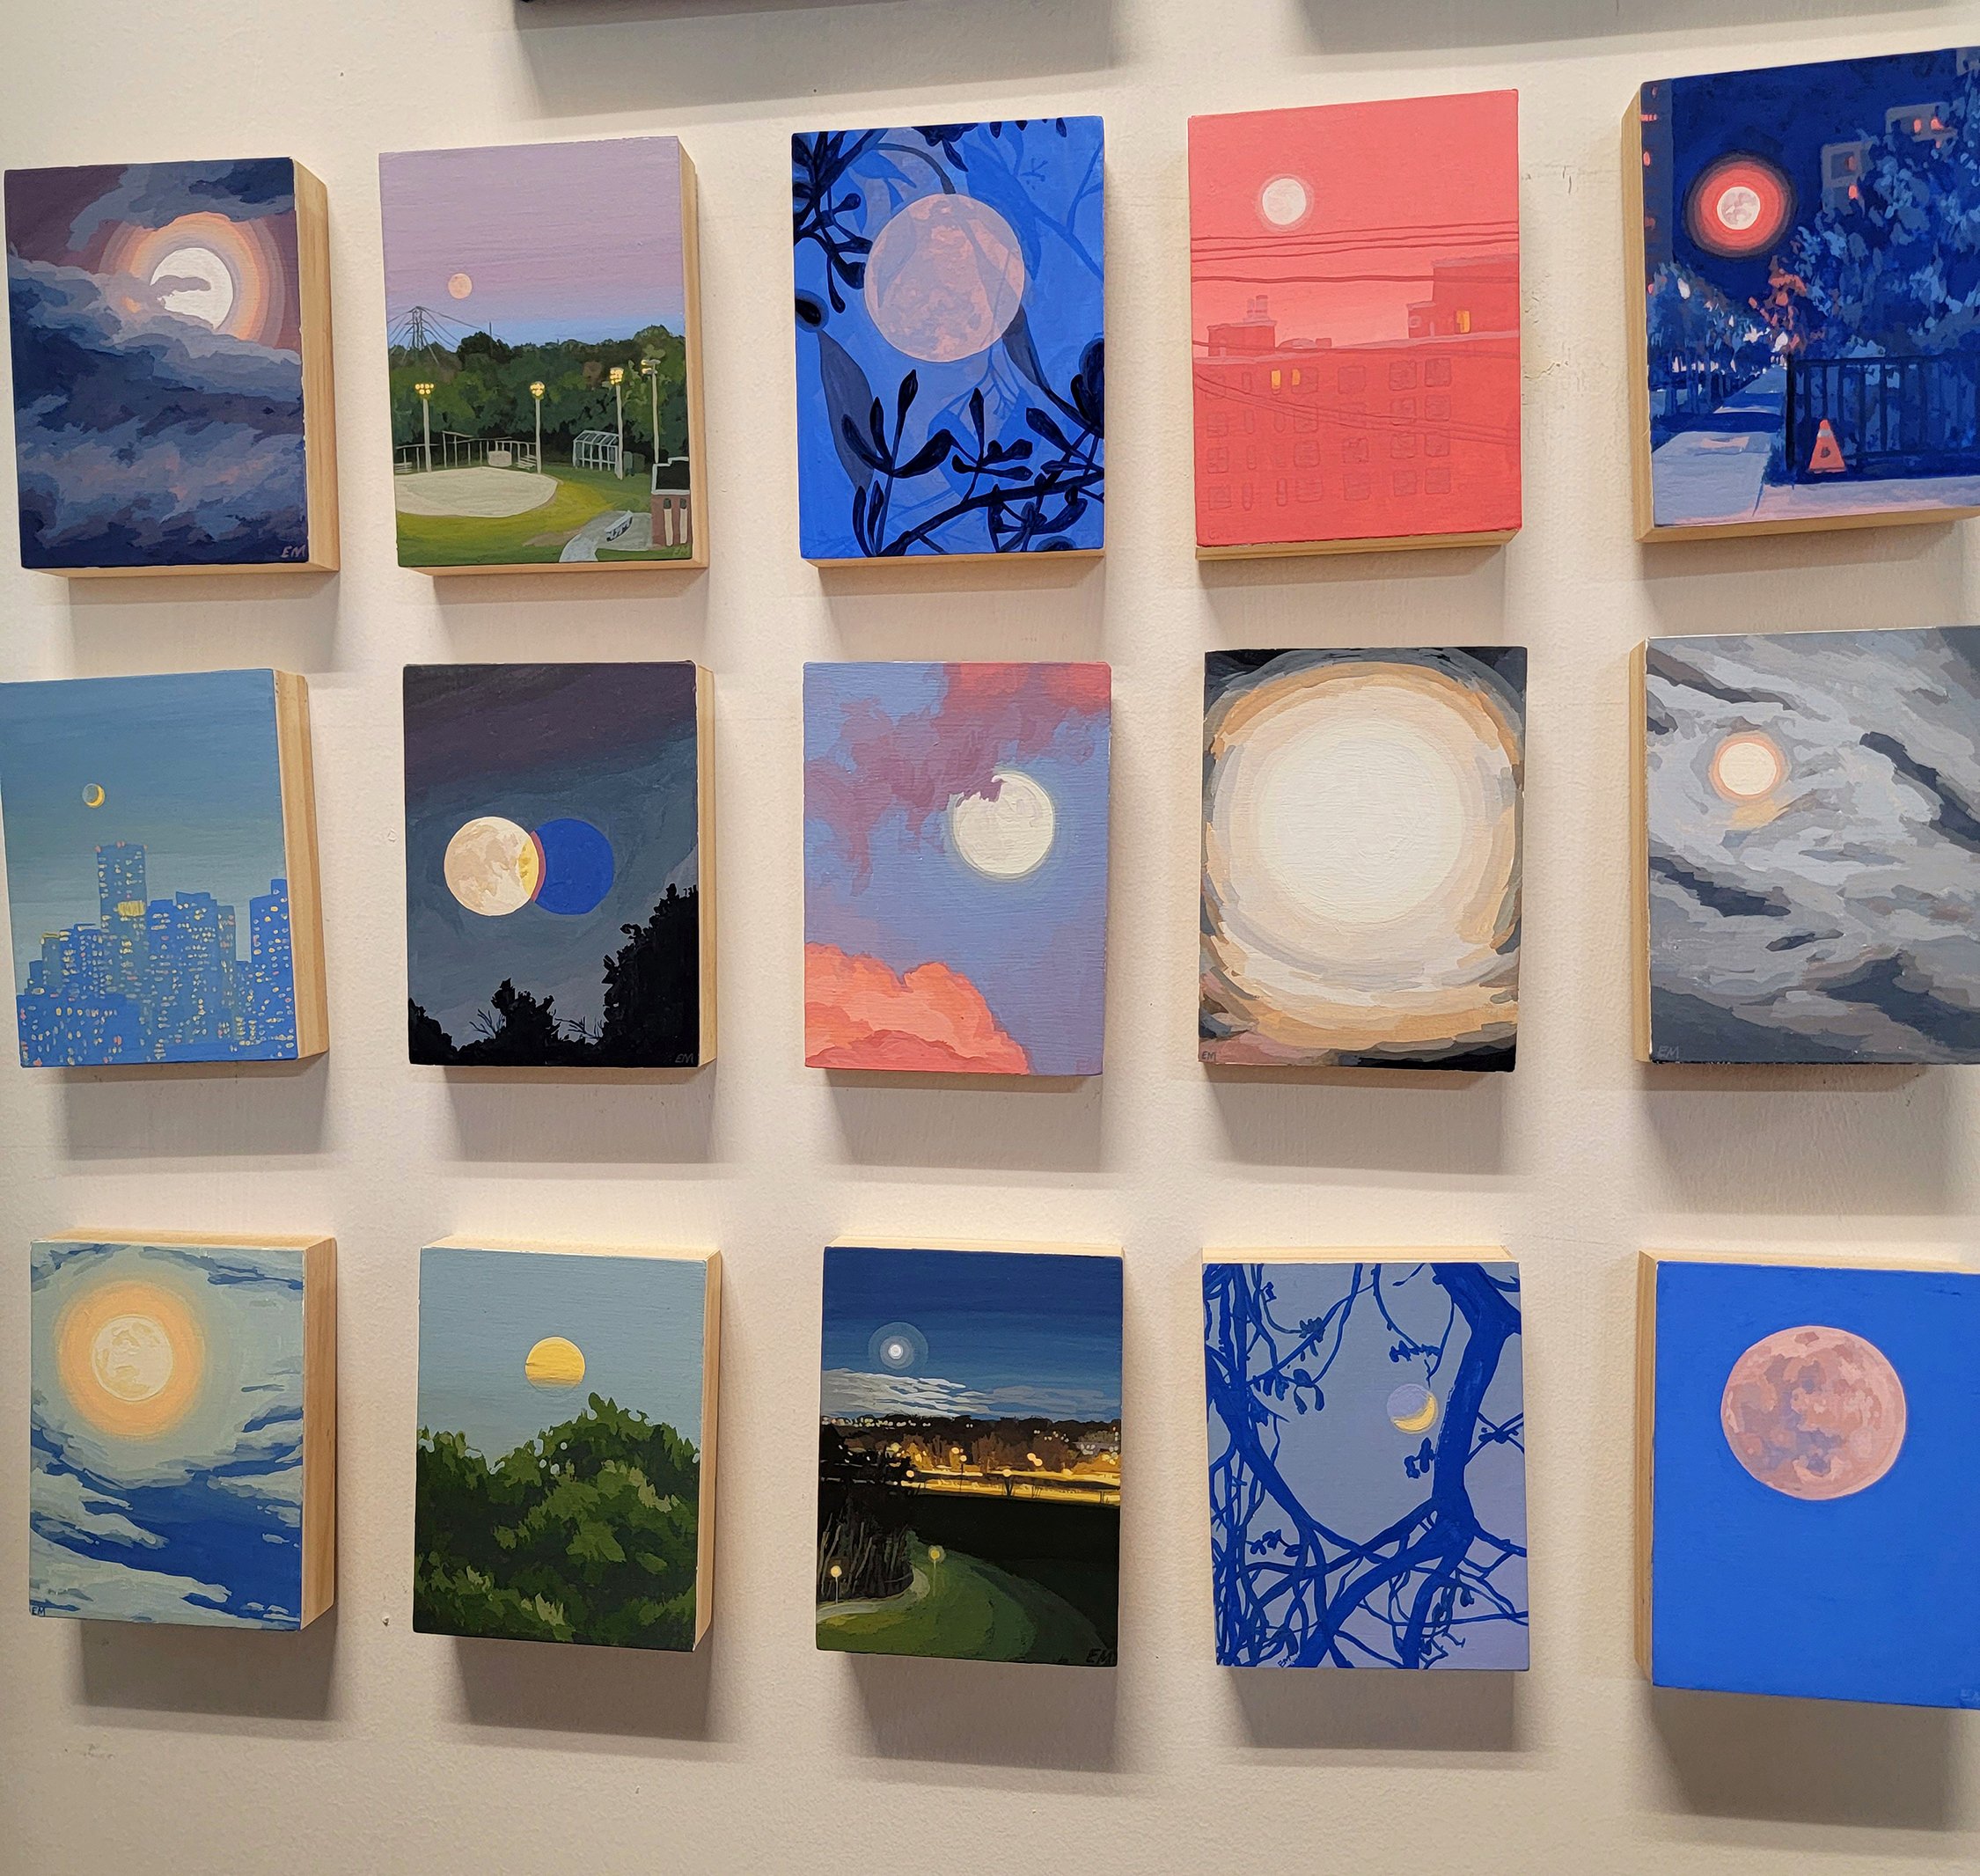   A photograph of 15 small and colourful paintings of moons amidst various backgrounds, including cityscapes, trees and forests, or through thick clouds.&nbsp;  